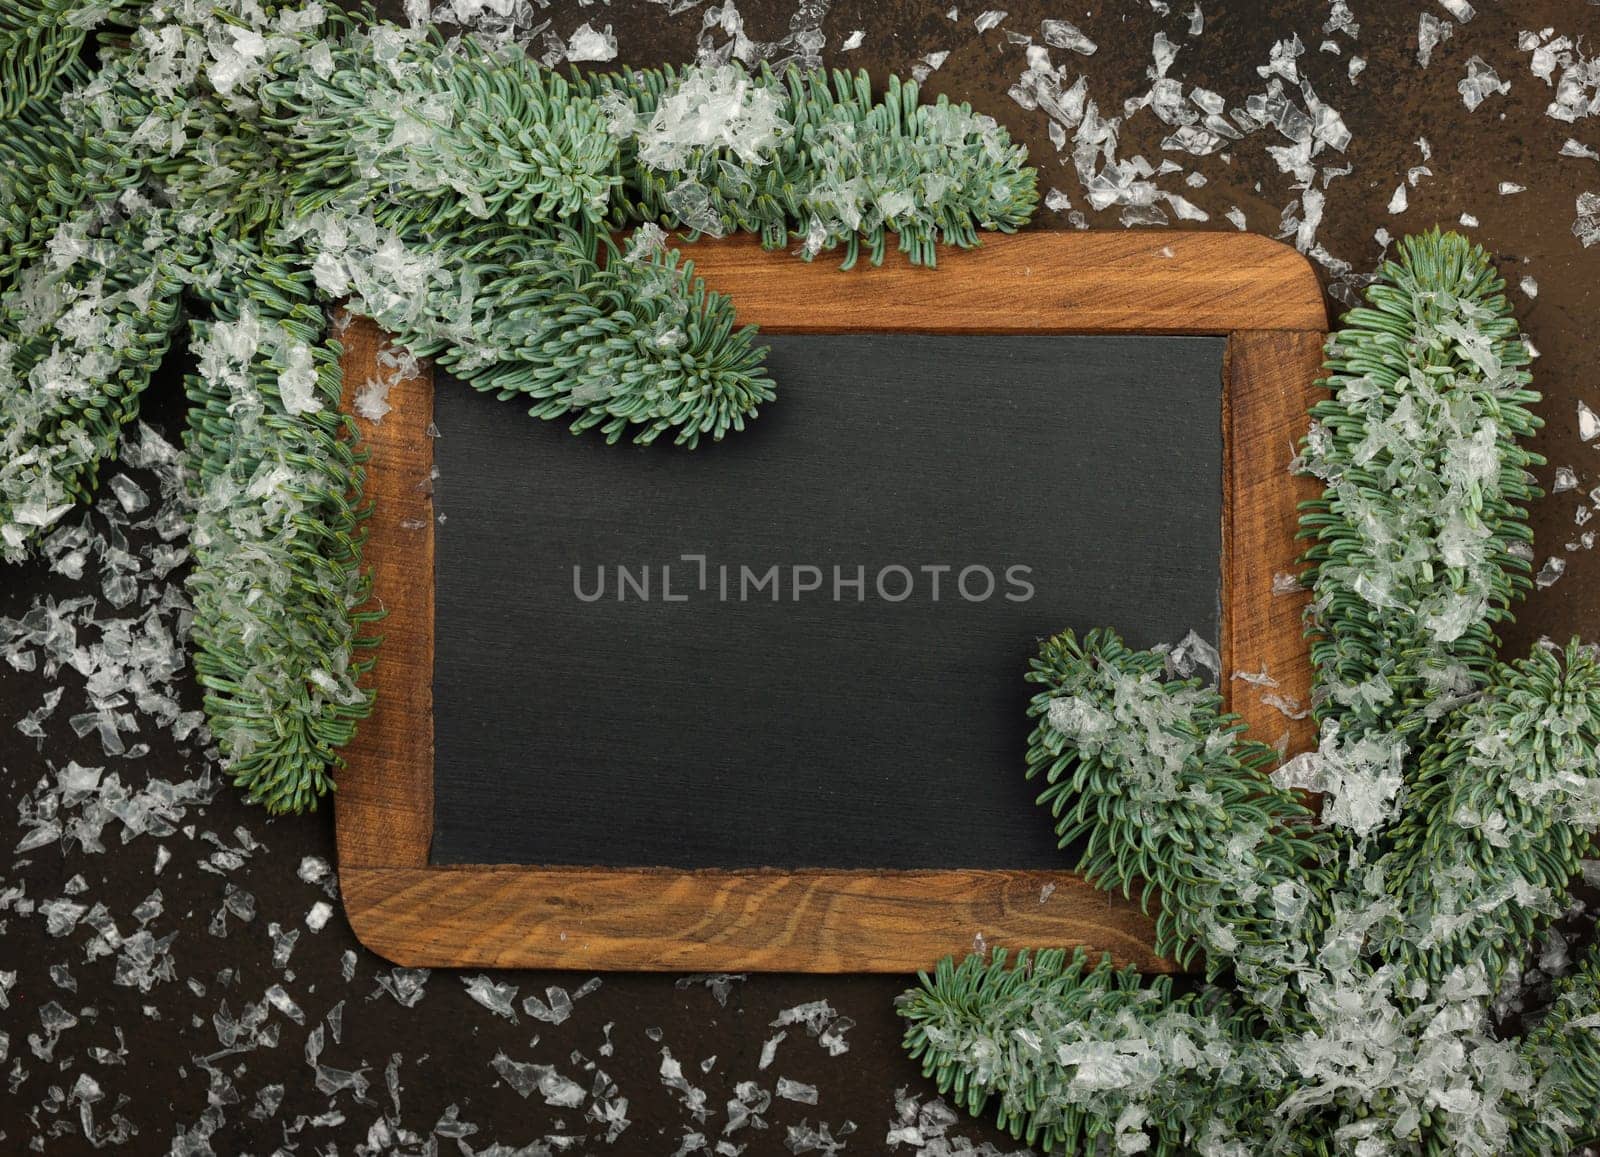 Close up vintage black chalkboard sign with wooden frame and Christmas decoration of fresh spruce branches and snow over dark brown background with copy space